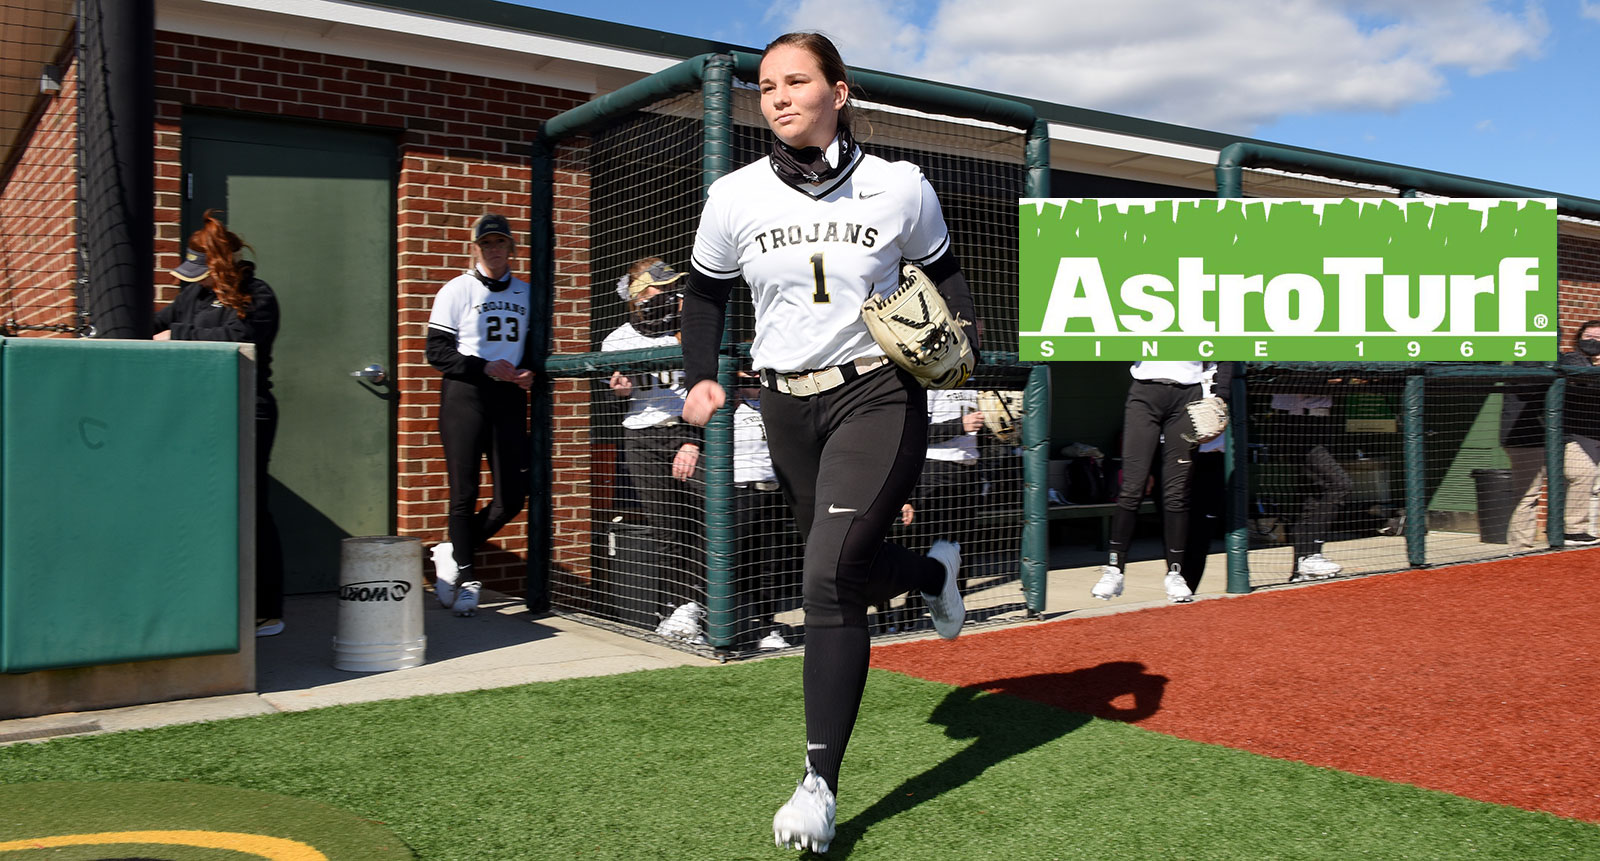 Williams Earns South Atlantic Conference AstroTurf Softball Player of the Week